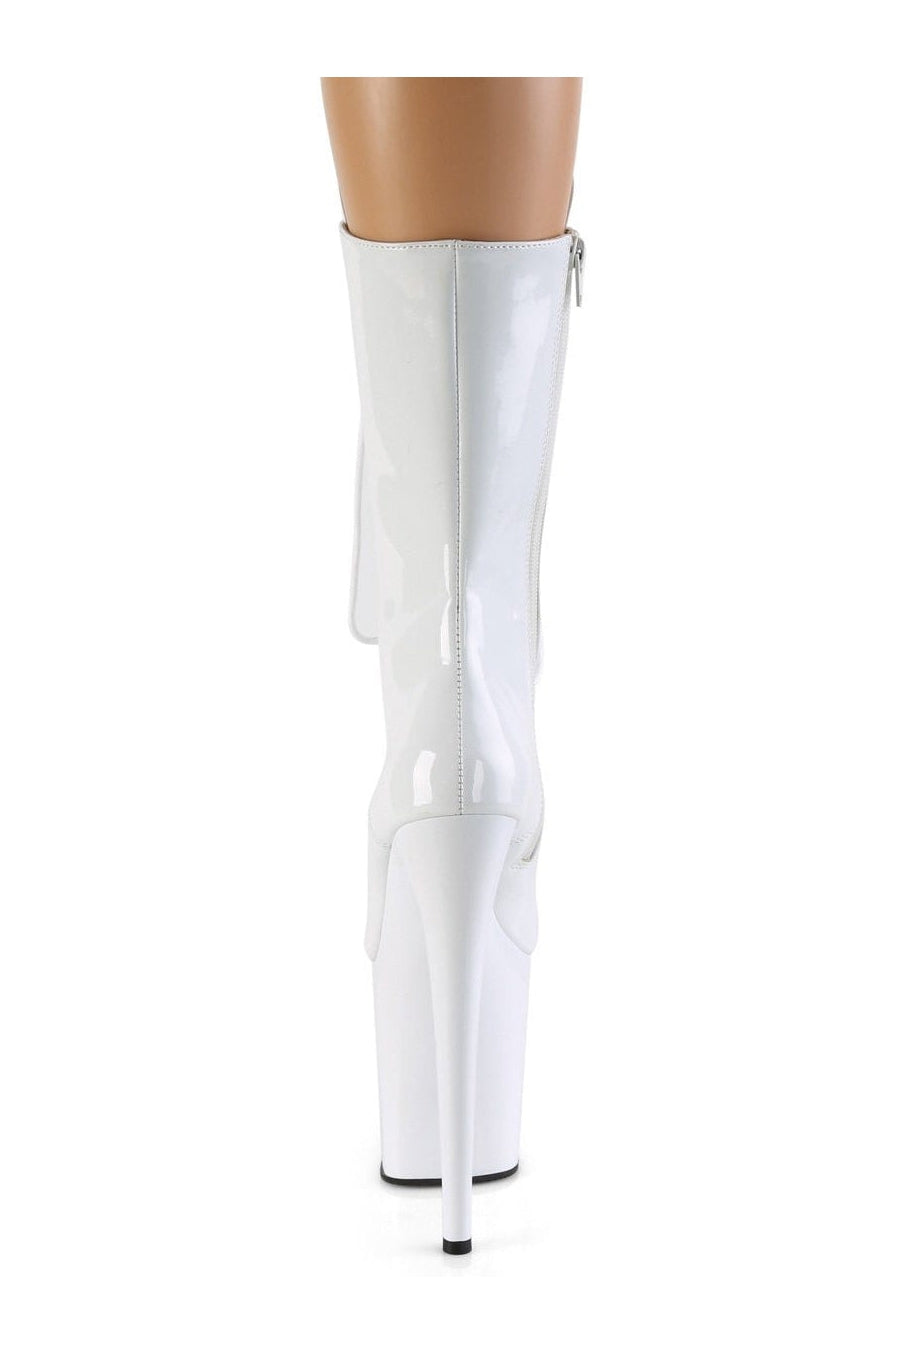 FLAMINGO-1050 Stripper Boot | White Patent-Ankle Boots-Pleaser-SEXYSHOES.COM